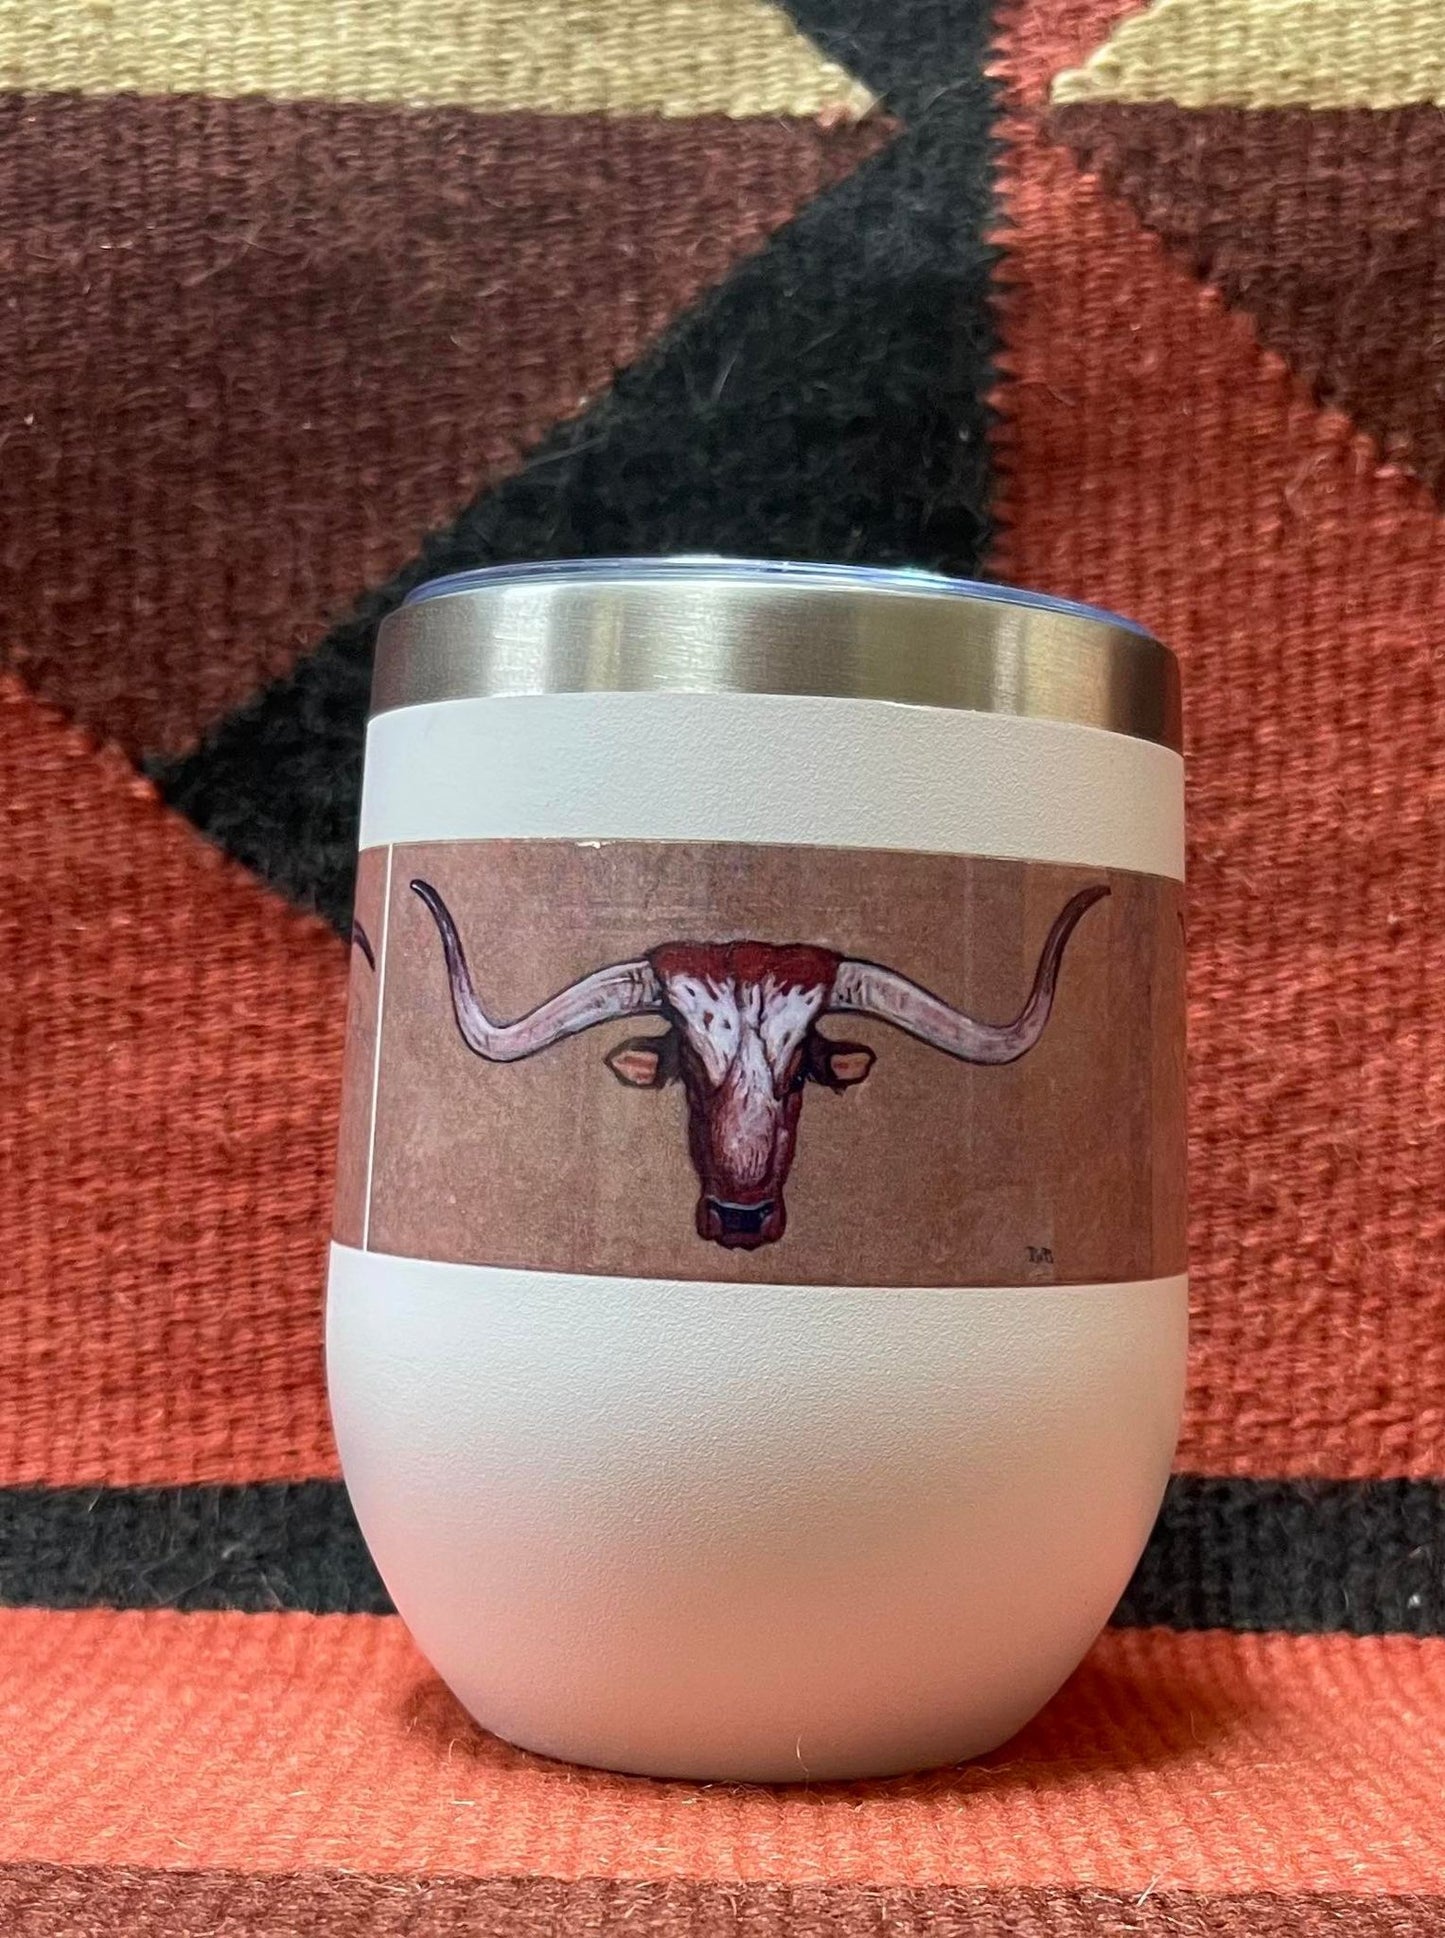 "The Longhorns" Copper Vacuum Insulated Cup, 12oz